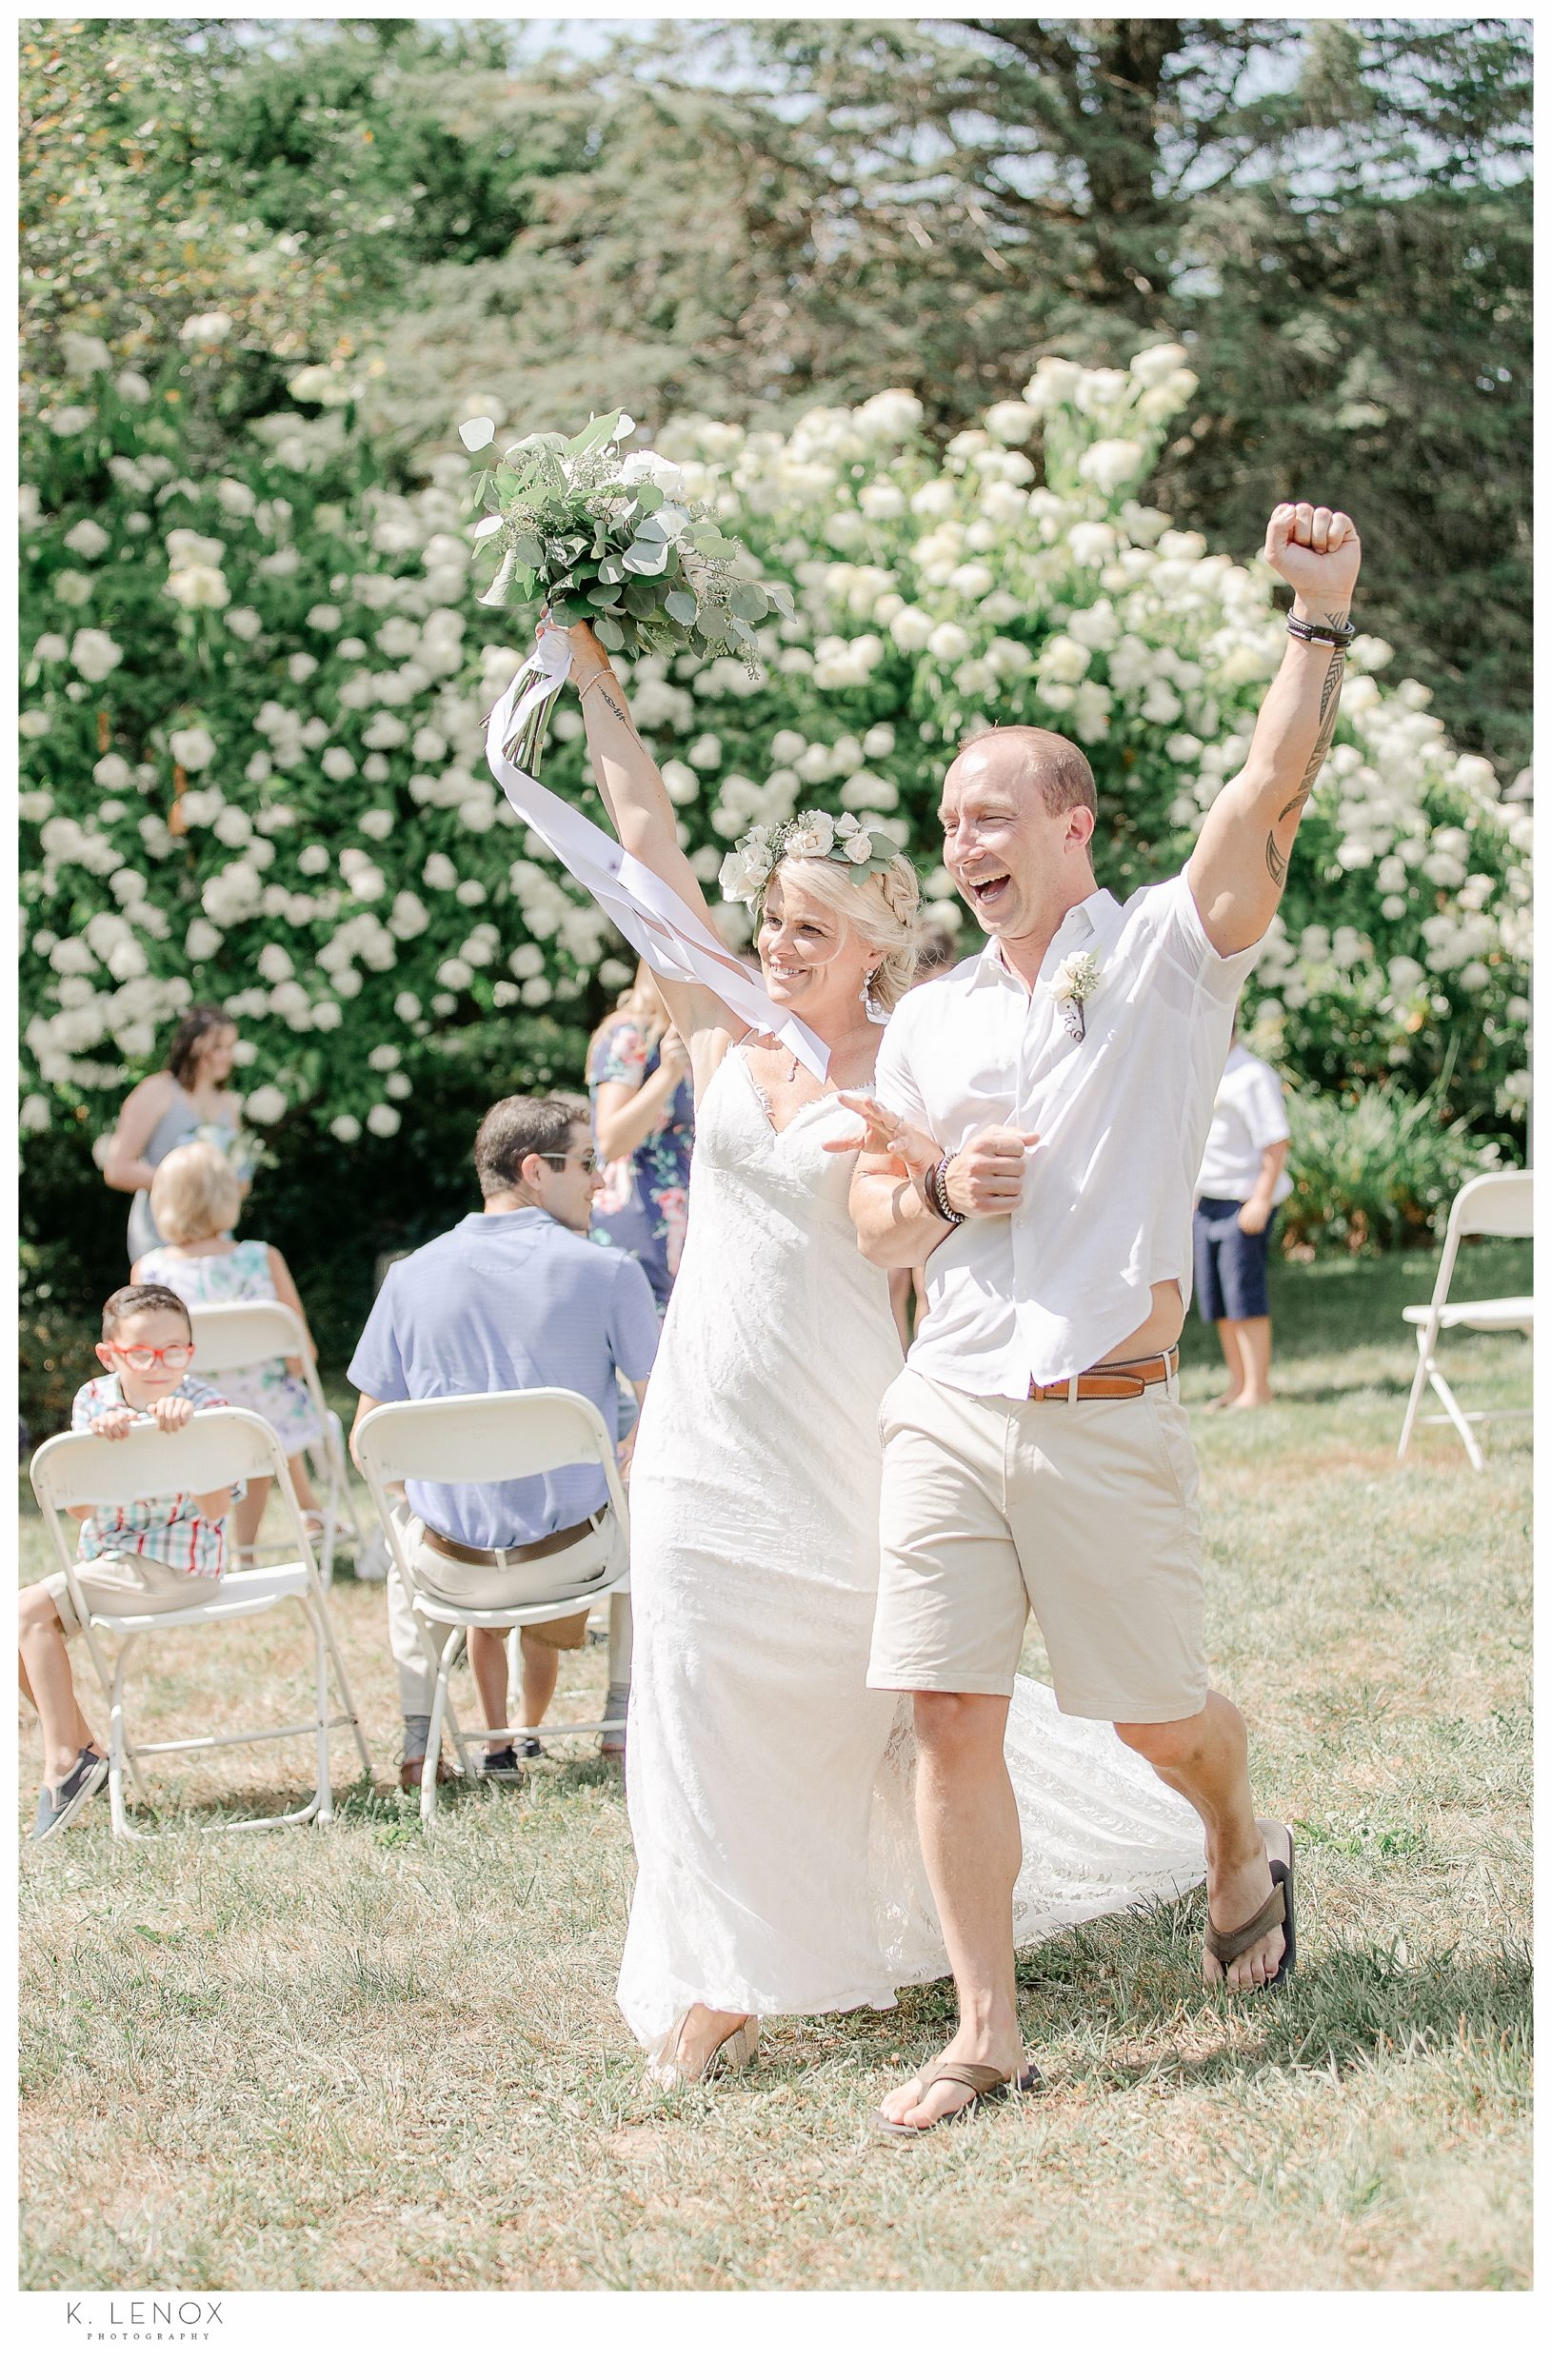 Light and Airy Micro Wedding at Moran Estates- Bride and Groom celebrating getting married during COVID